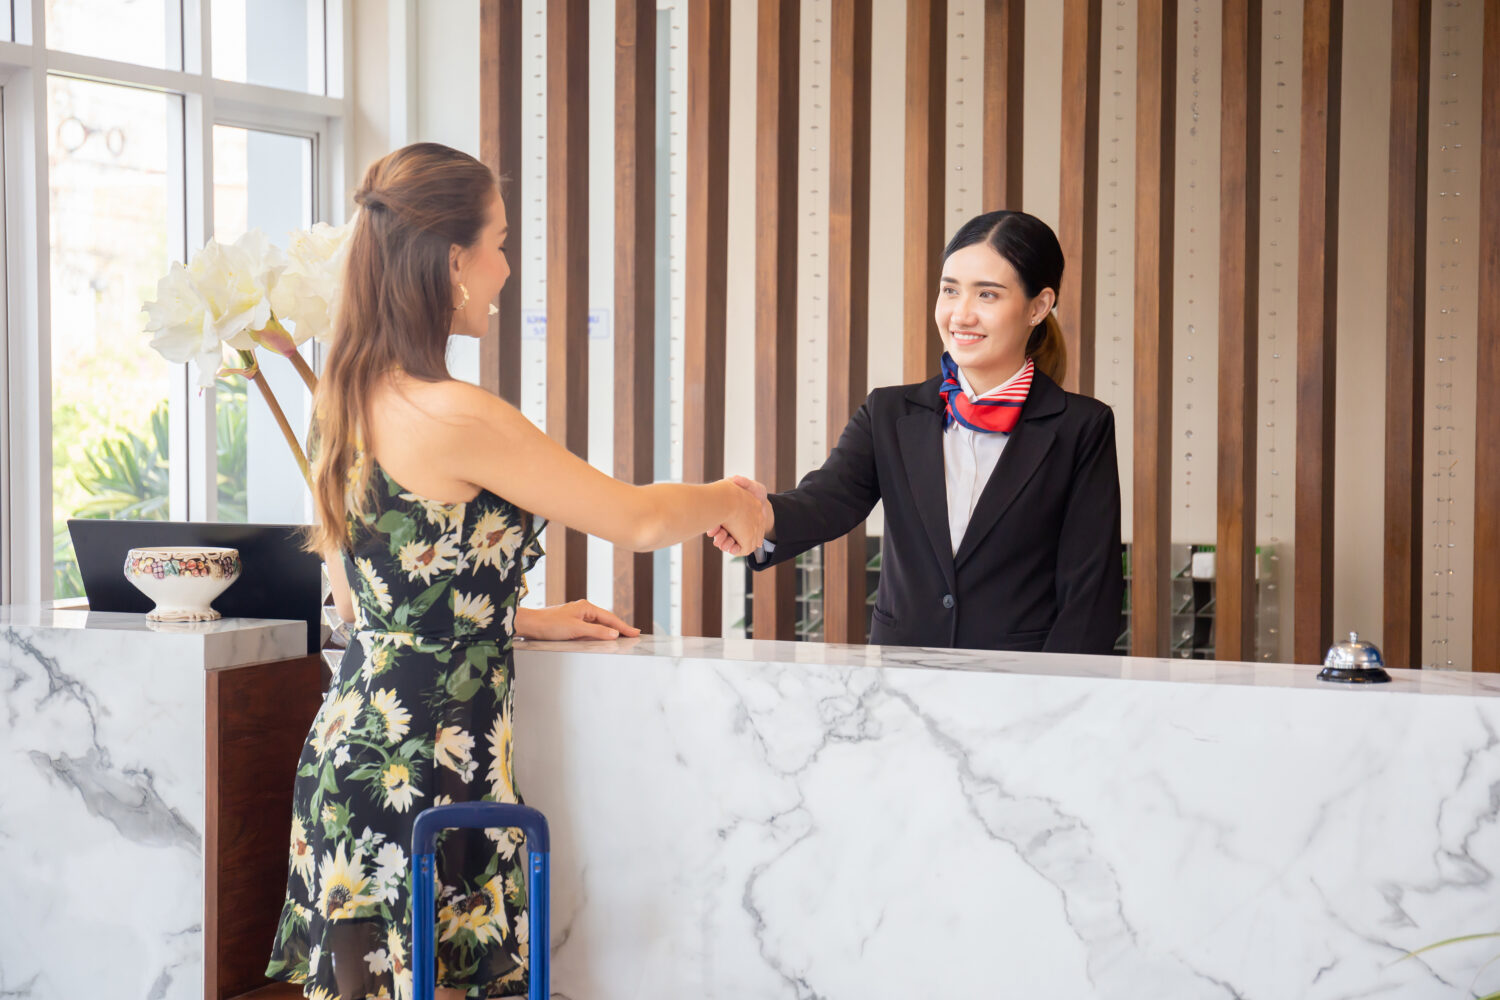 happy guest shaking hand with front desk receptionist